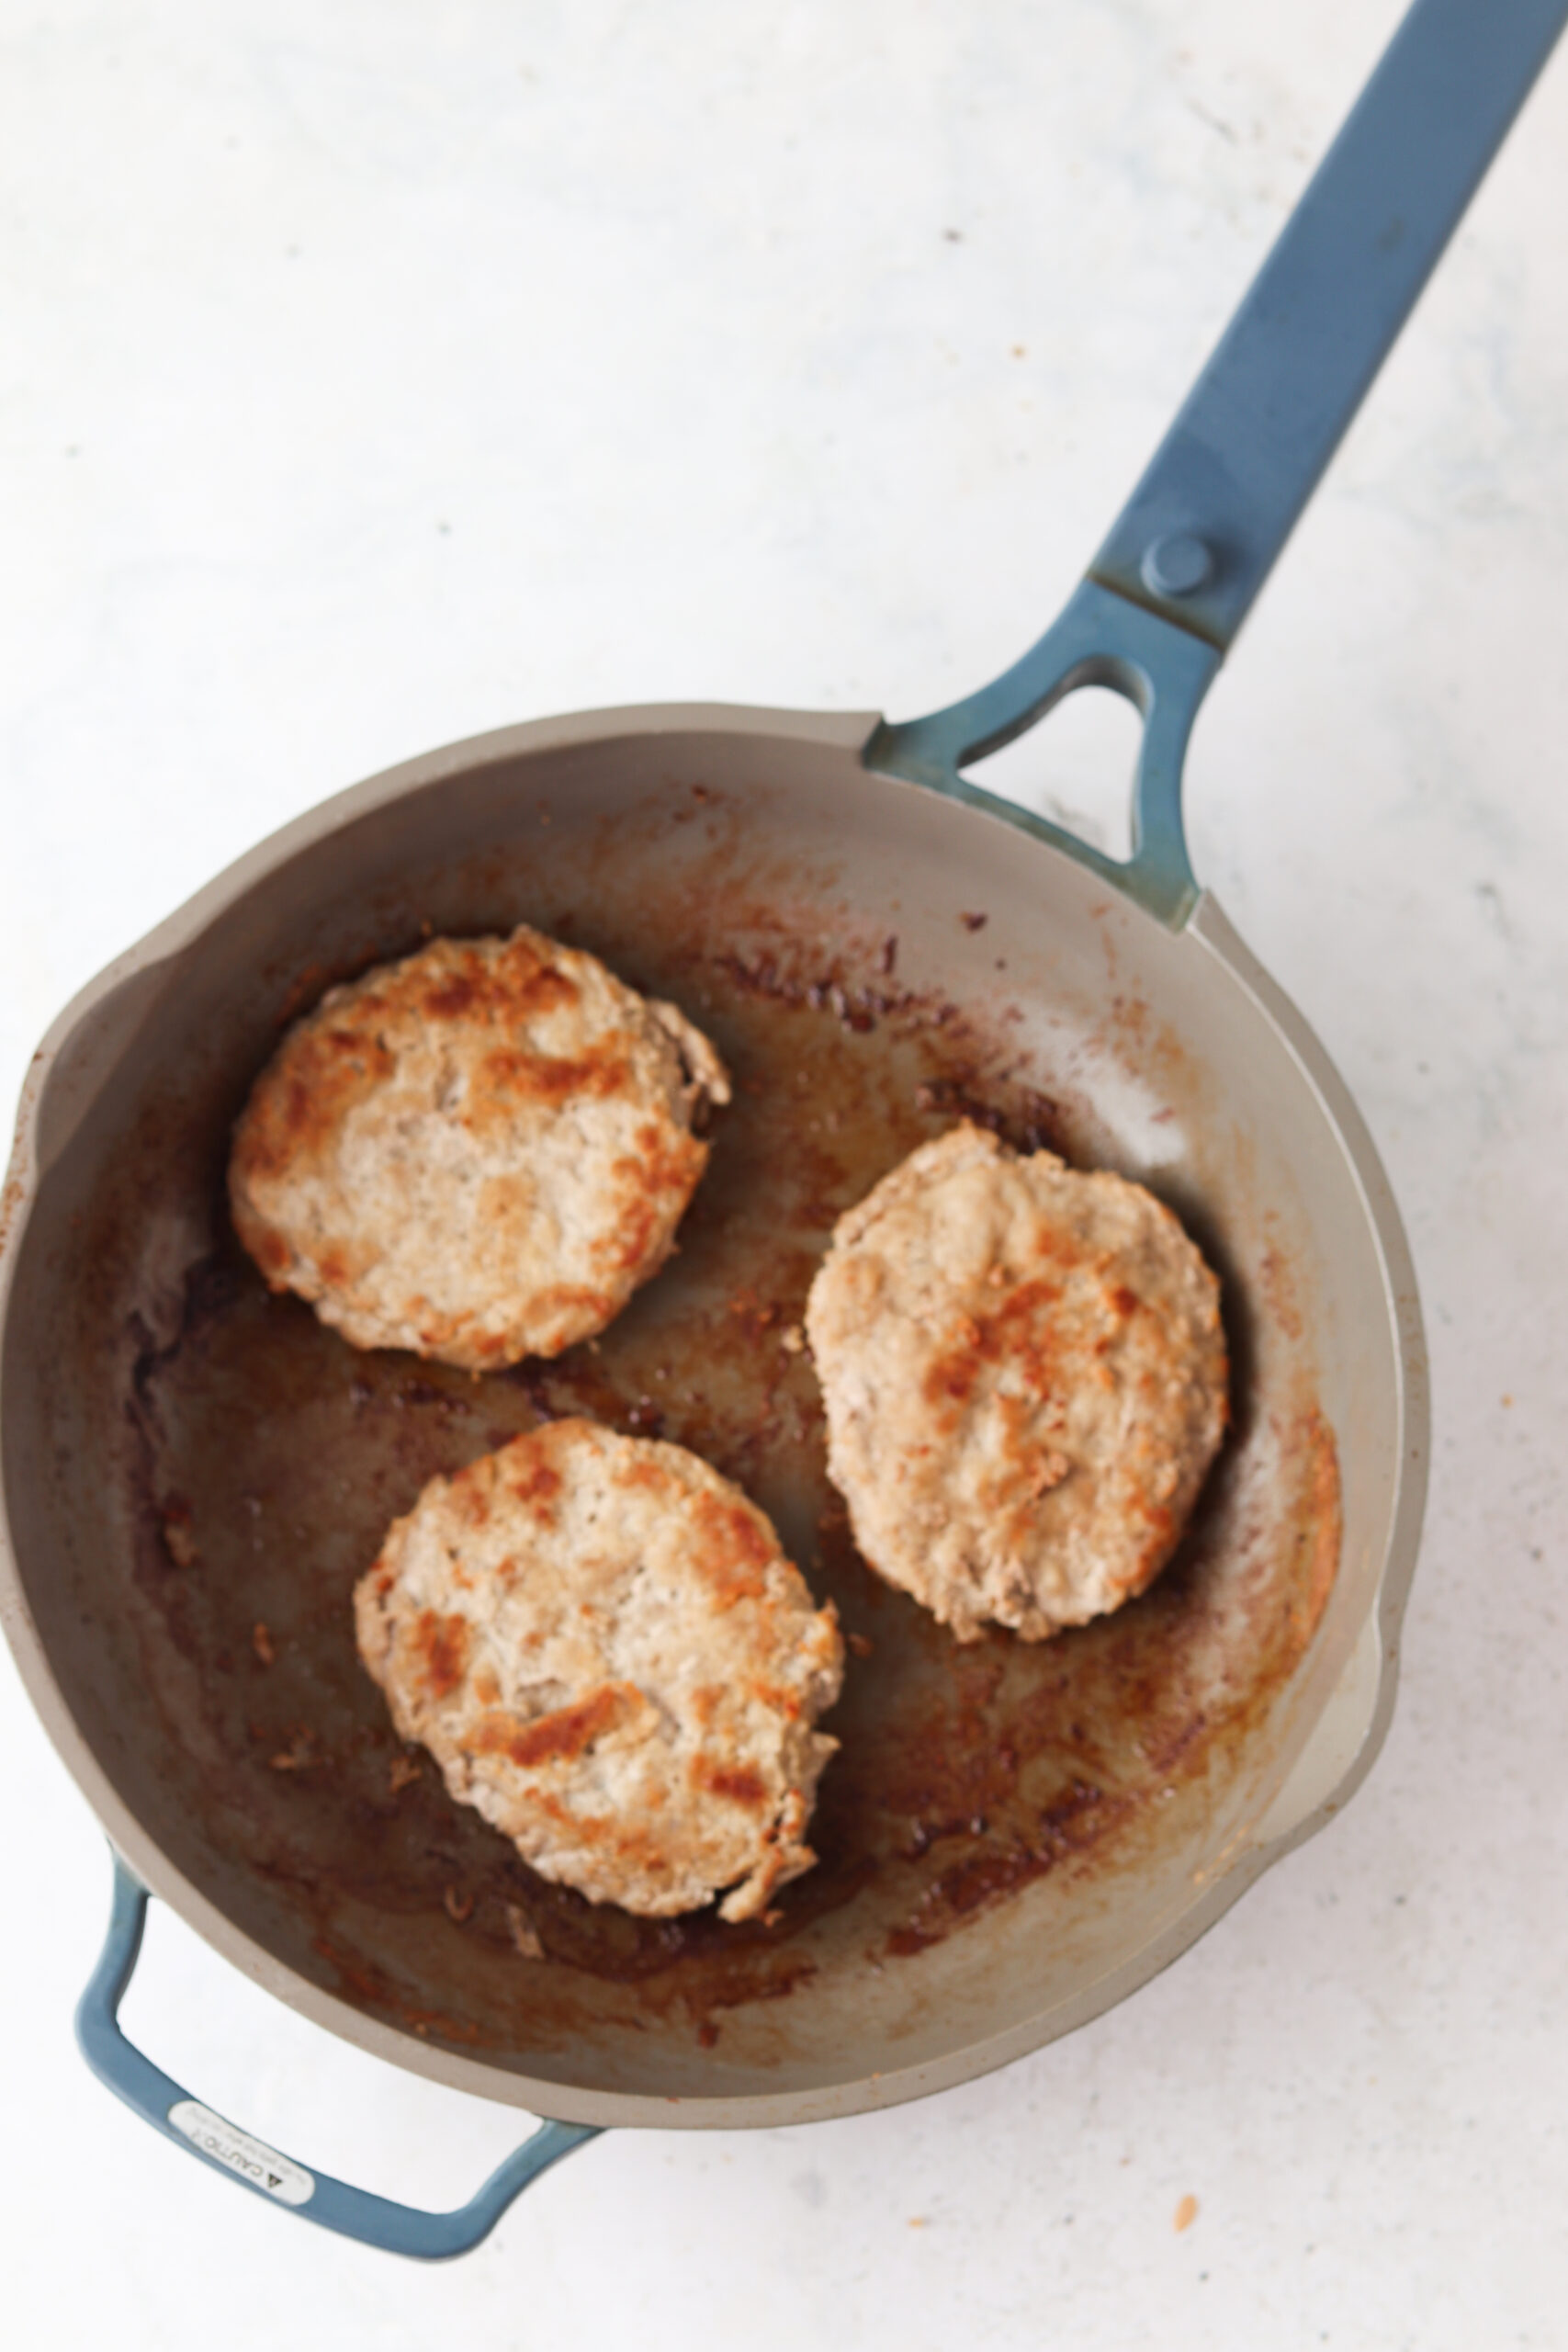 Cooked frozen burger patties in a skillet.